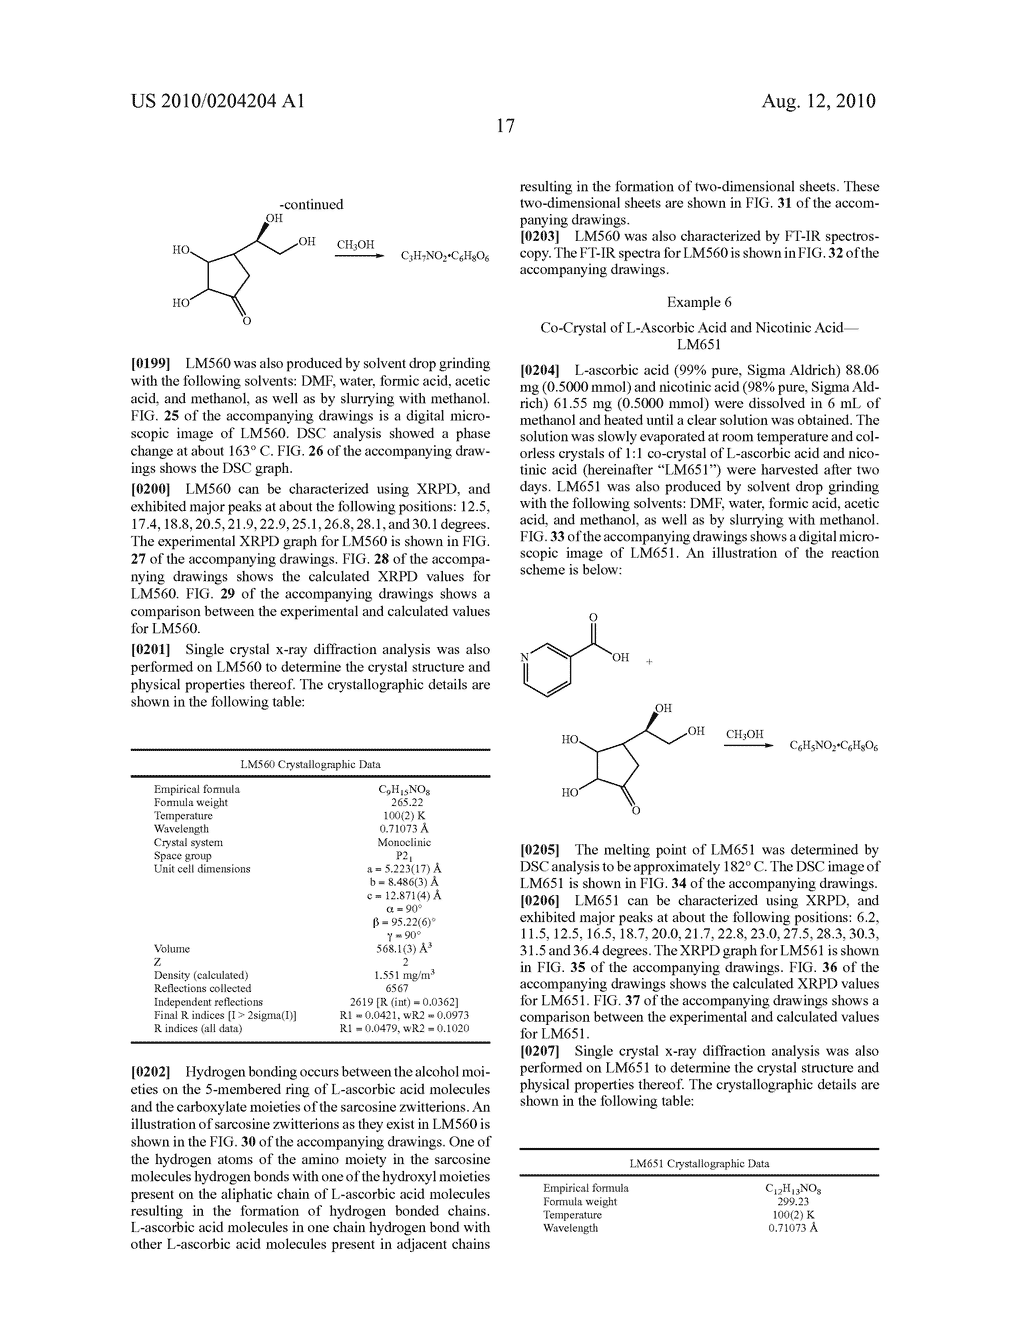 NUTRACEUTICAL CO-CRYSTAL COMPOSITIONS - diagram, schematic, and image 82